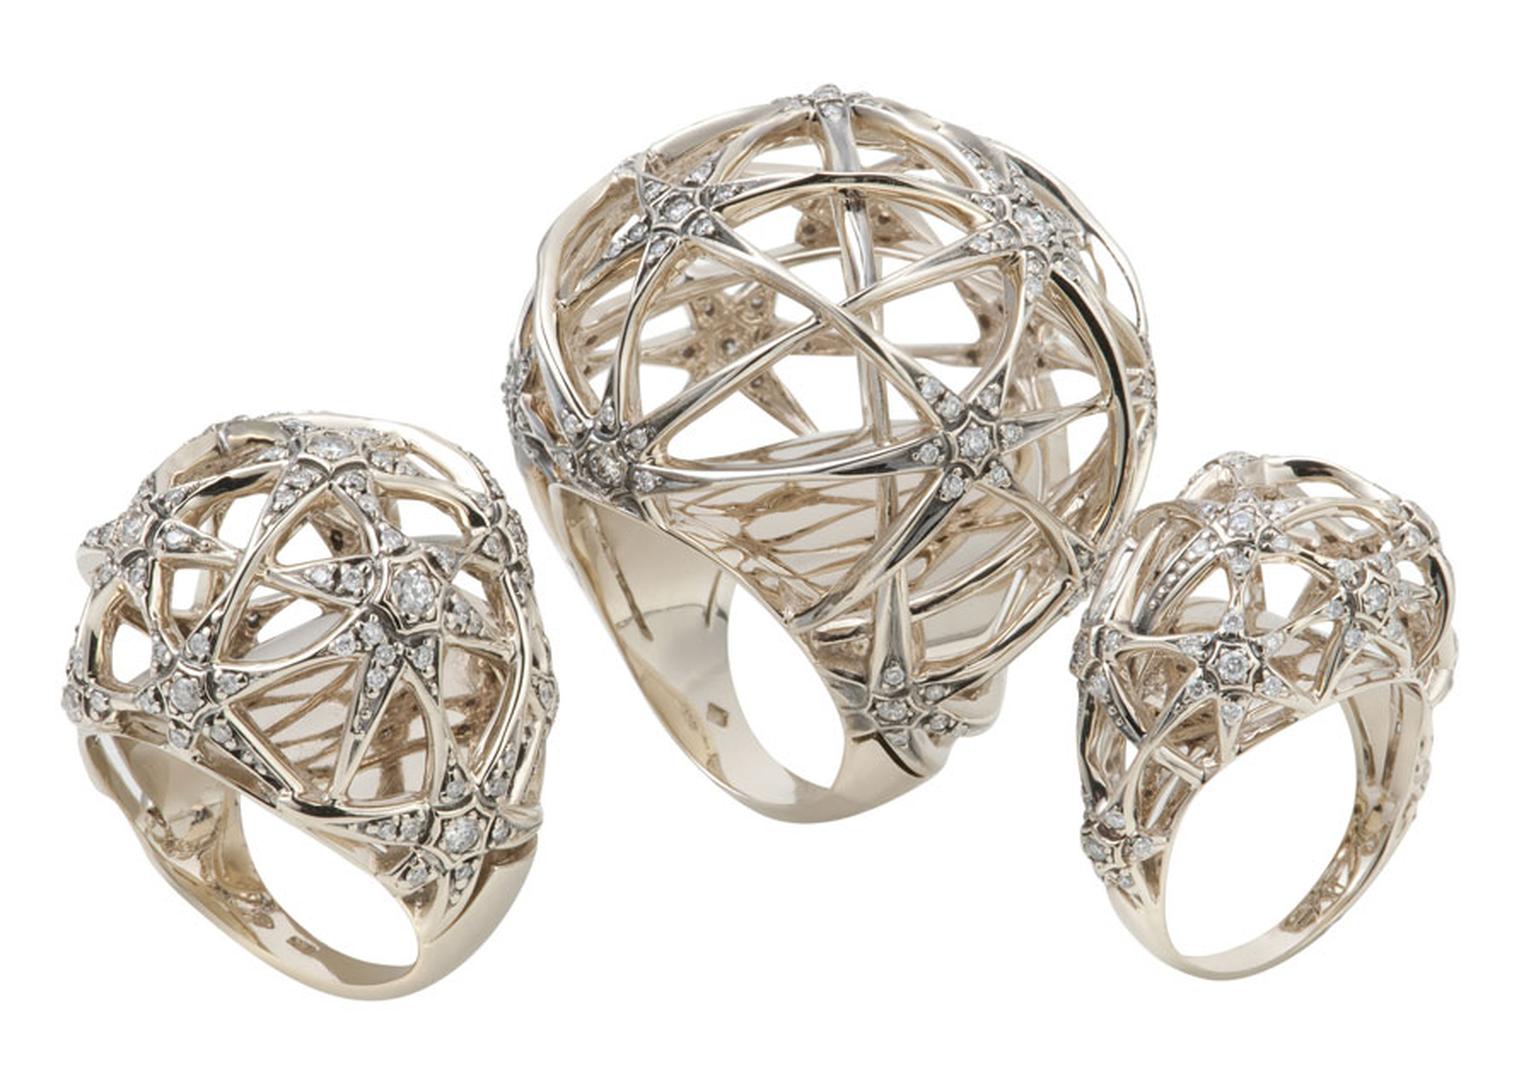 HStern Copernicus-Rings-in-Noble-Gold-and-diamonds.  £6,600, £ 8,900, £3,000